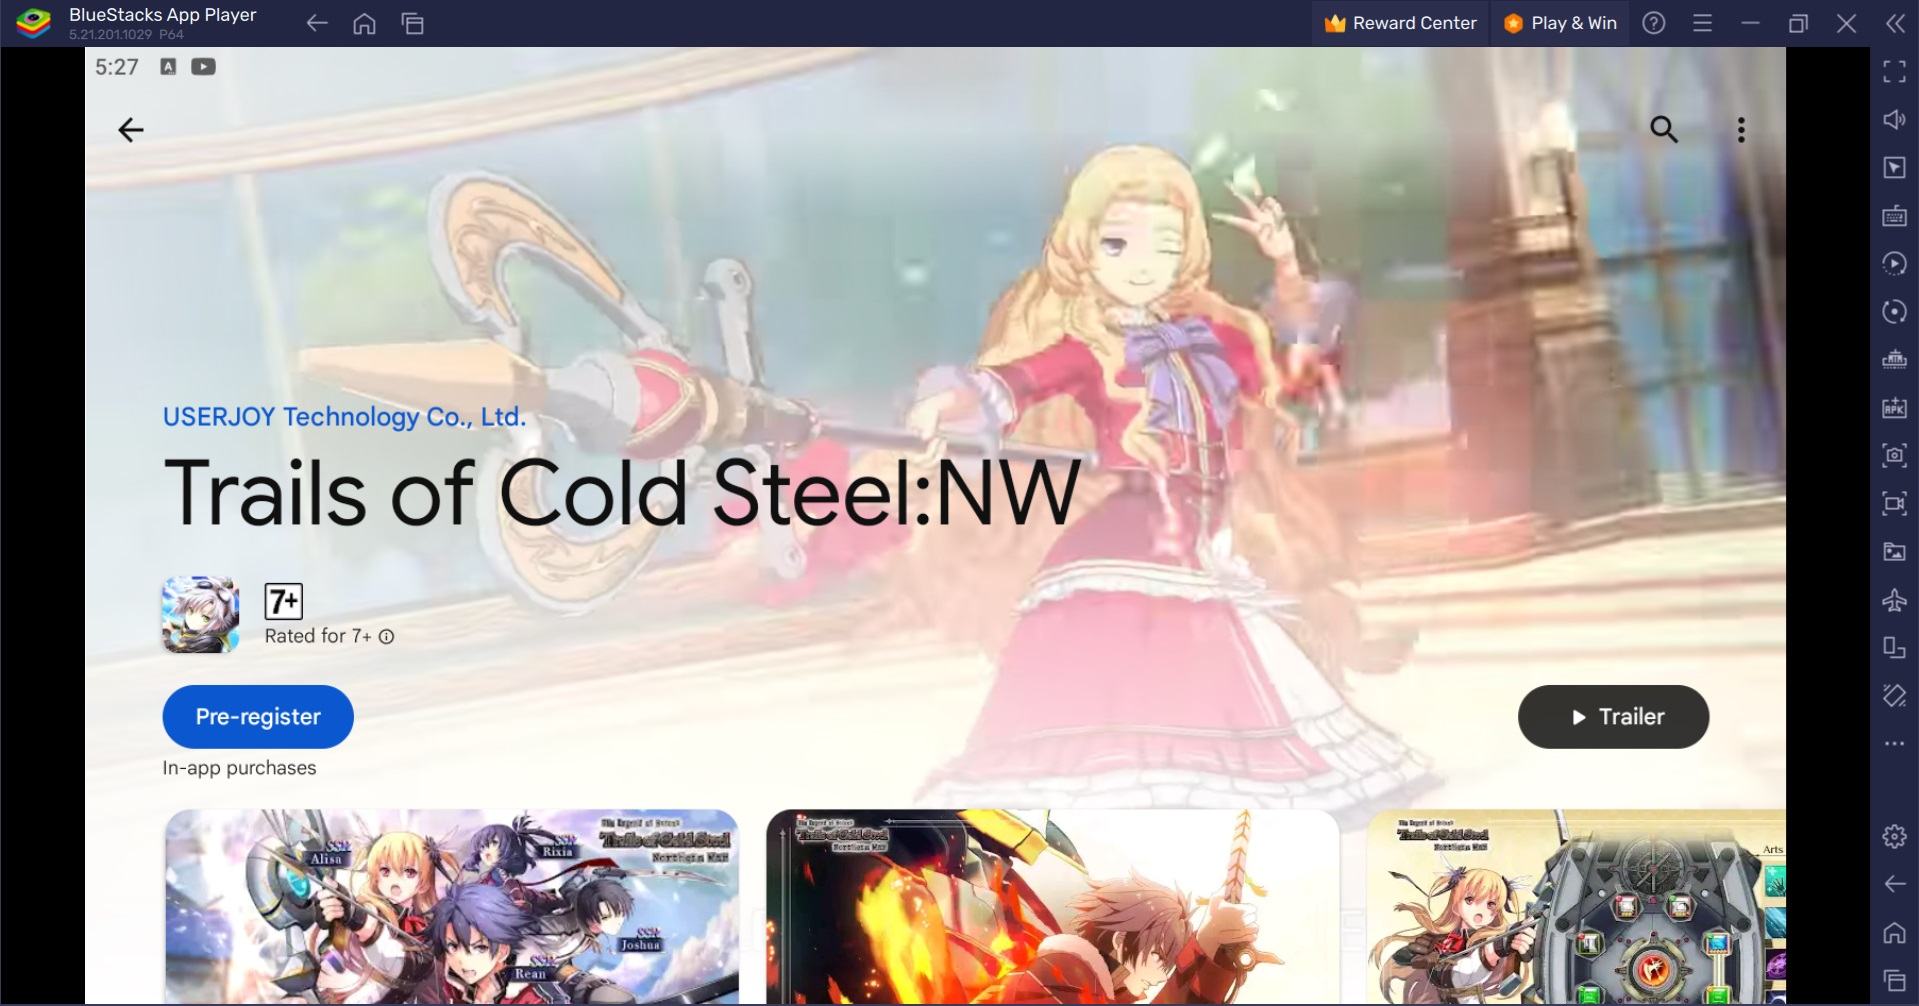 How to Play Trails of Cold Steel:NW on PC with BlueStacks